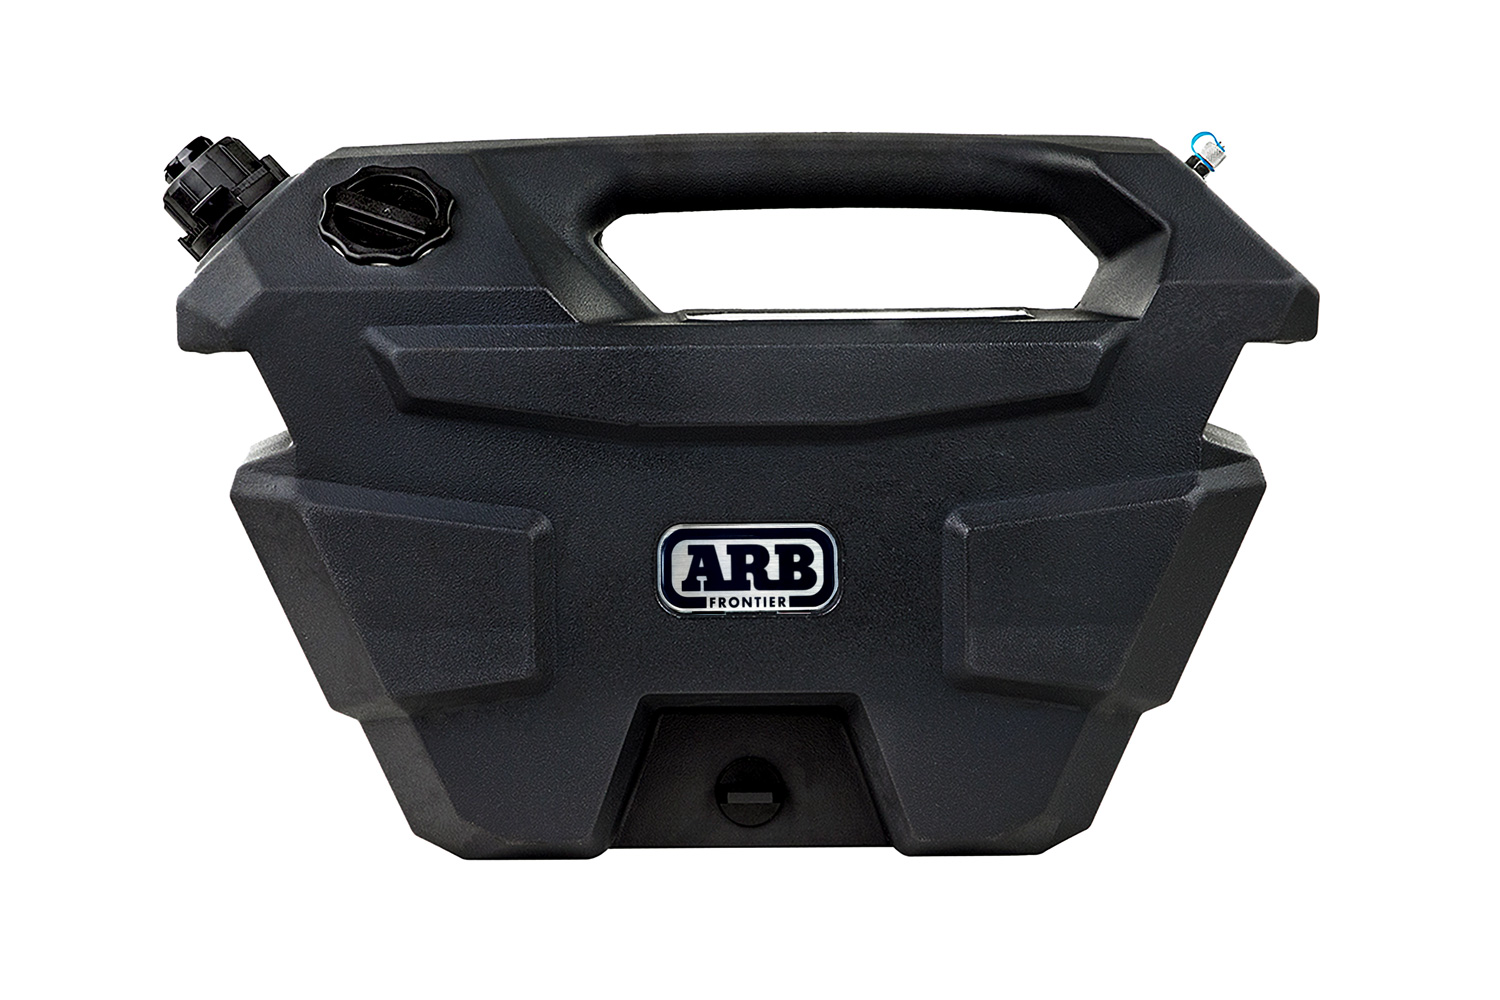 ARB Long Range Fuel Tank, do you need one? Fitted to the Isuzu